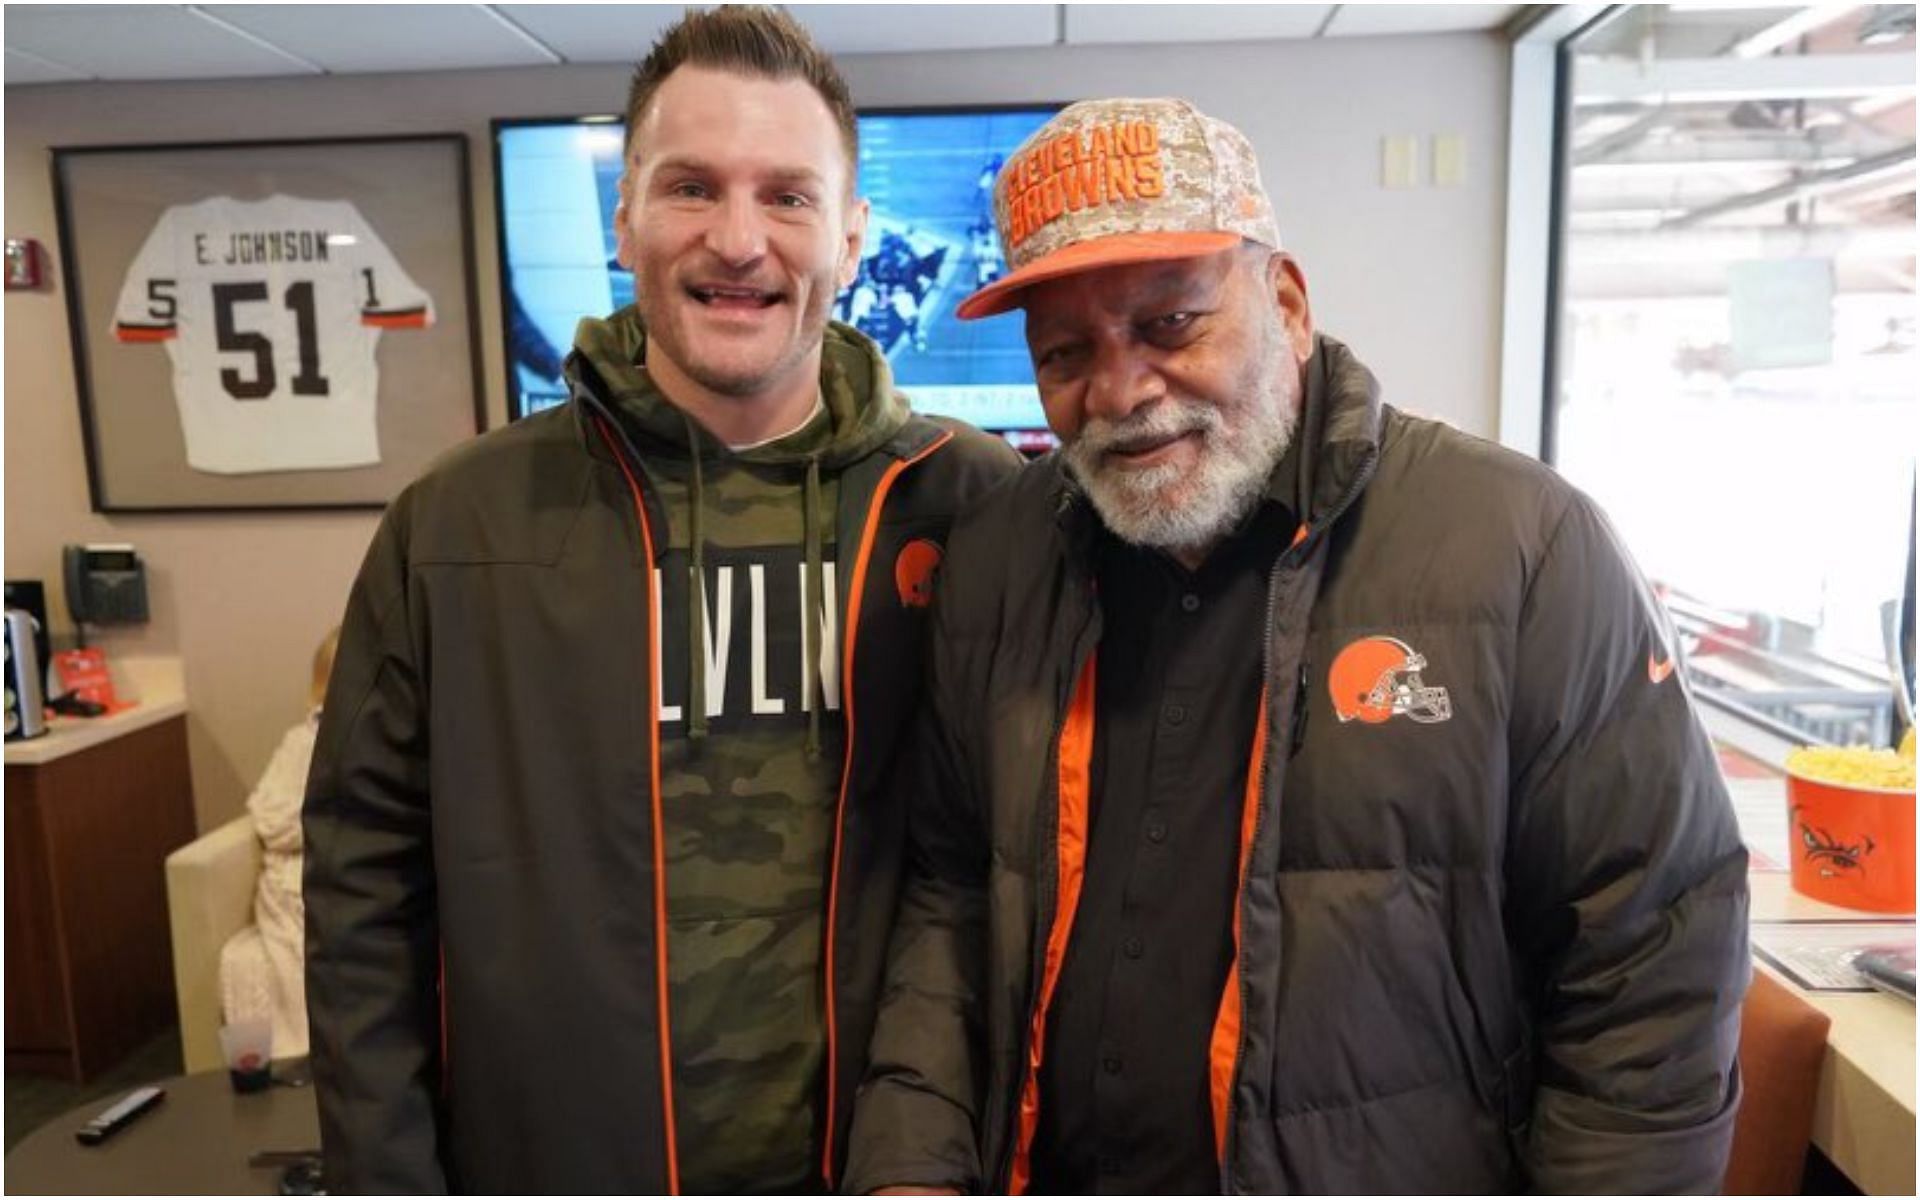 Stipe Miocic along with late Jim Brown